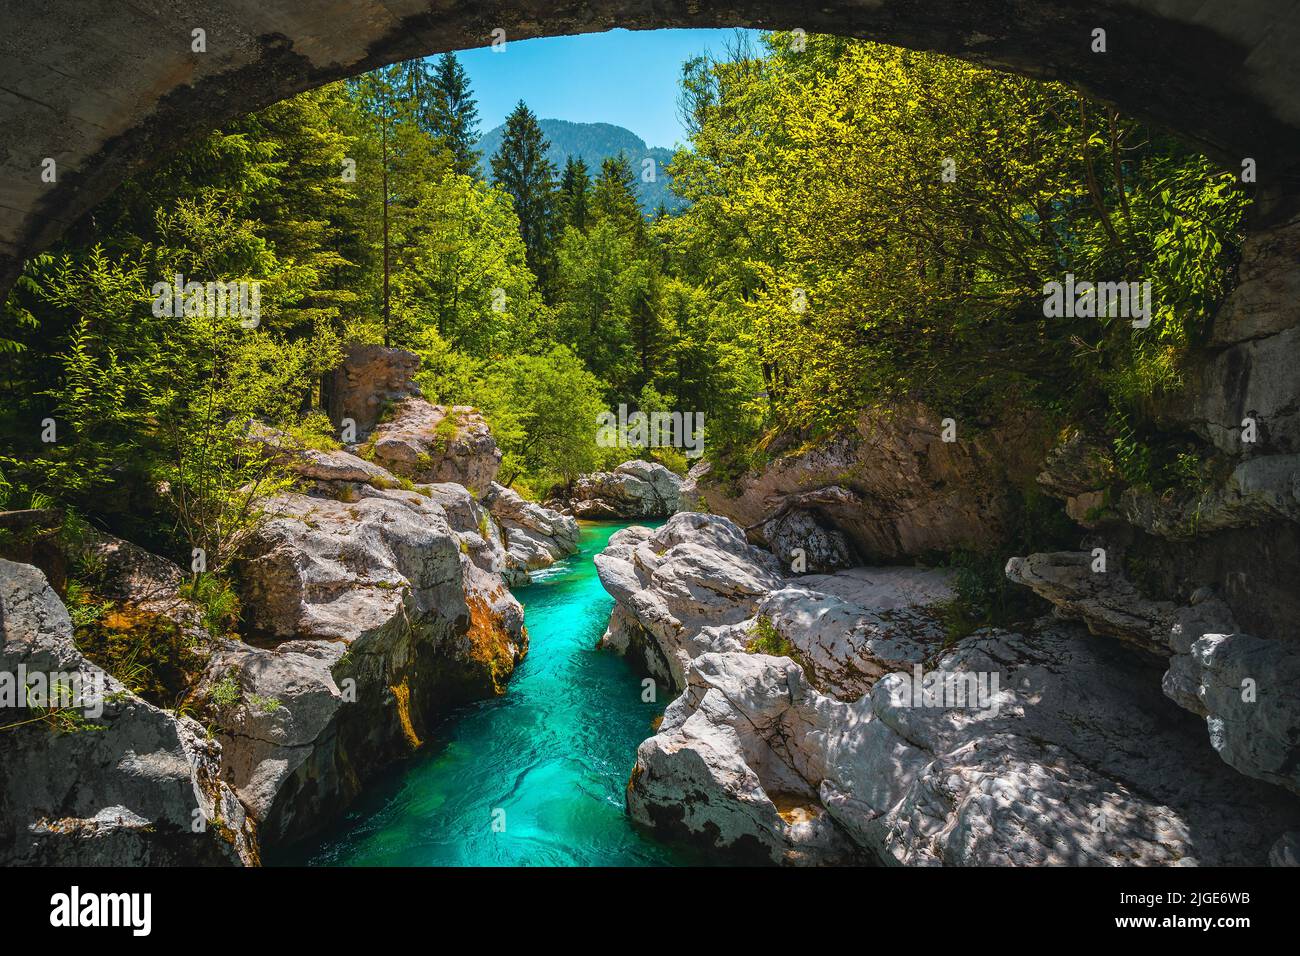 Admirable nature landscape with turquoise river. Famous Soca river with rocky gorge in the forest, Bovec, Slovenia, Europe Stock Photo